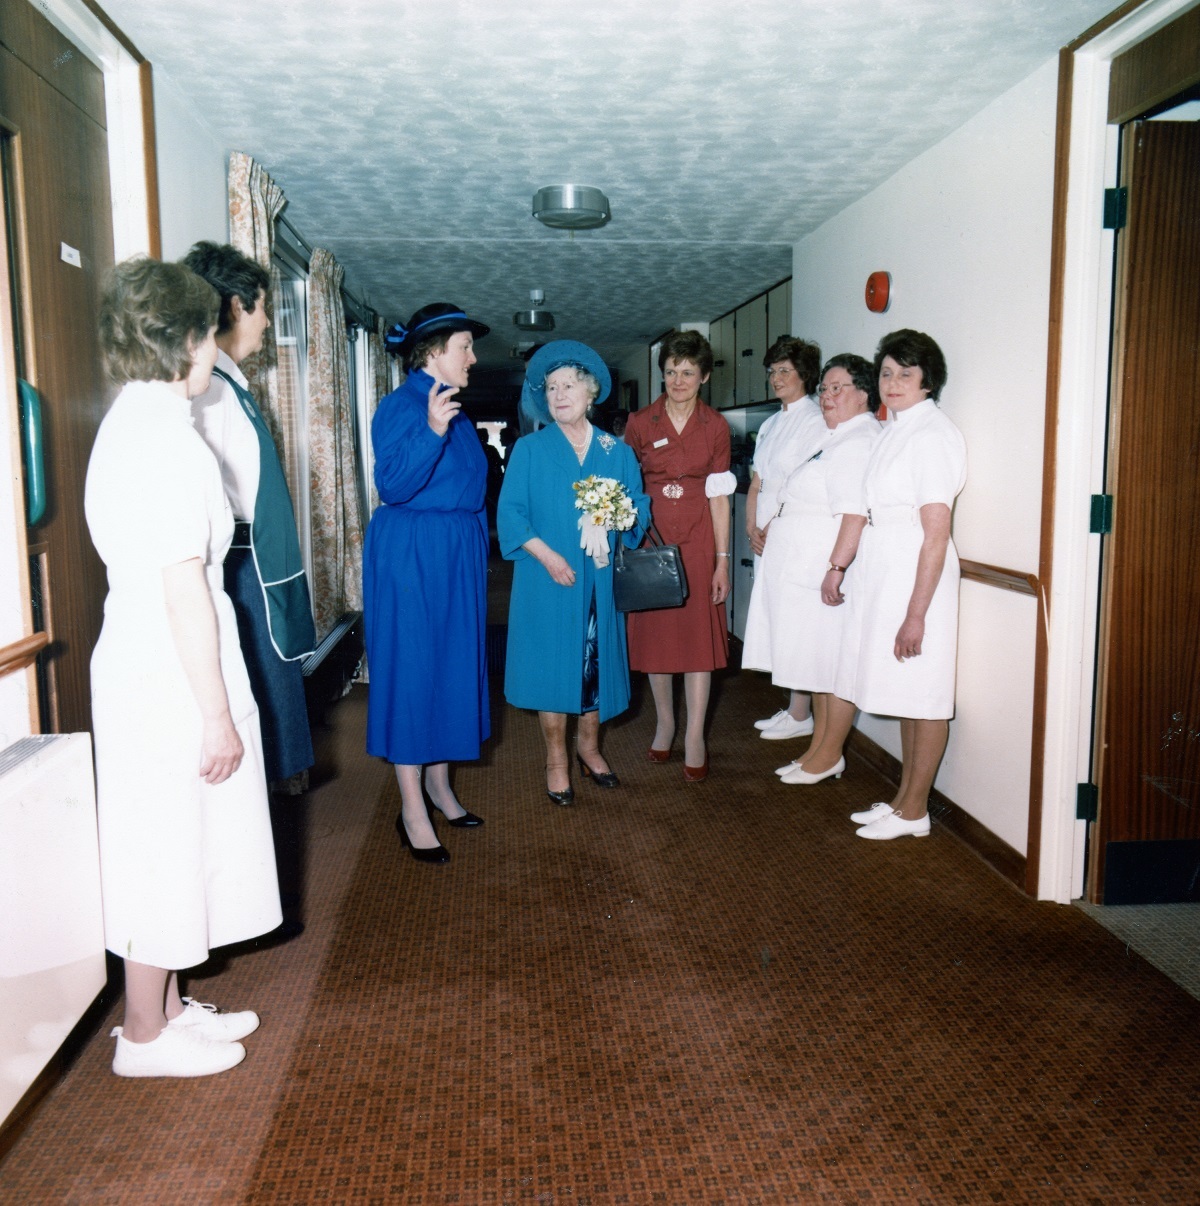 Standing to attention - Dr Elizabeth Hall, one of the hospice’s founders and first medical director, and matron Jenny Wayte introduce the royal visitor to some of their nursing team